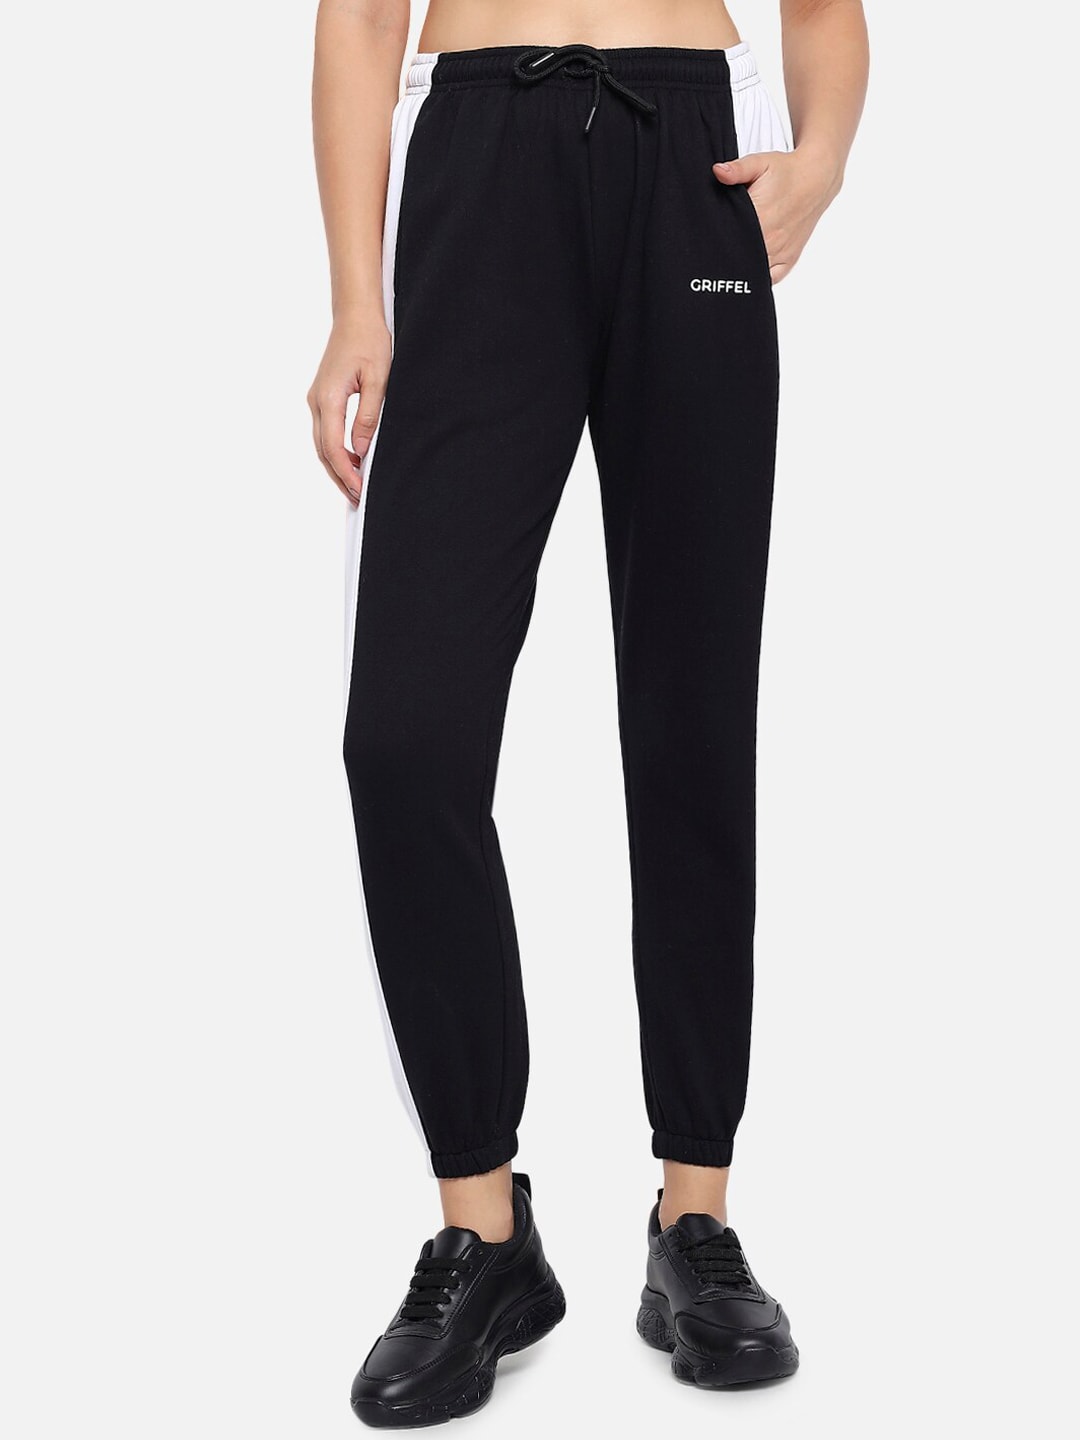 GRIFFEL Women Black Brand Logo-Printed Cotton Joggers Price in India